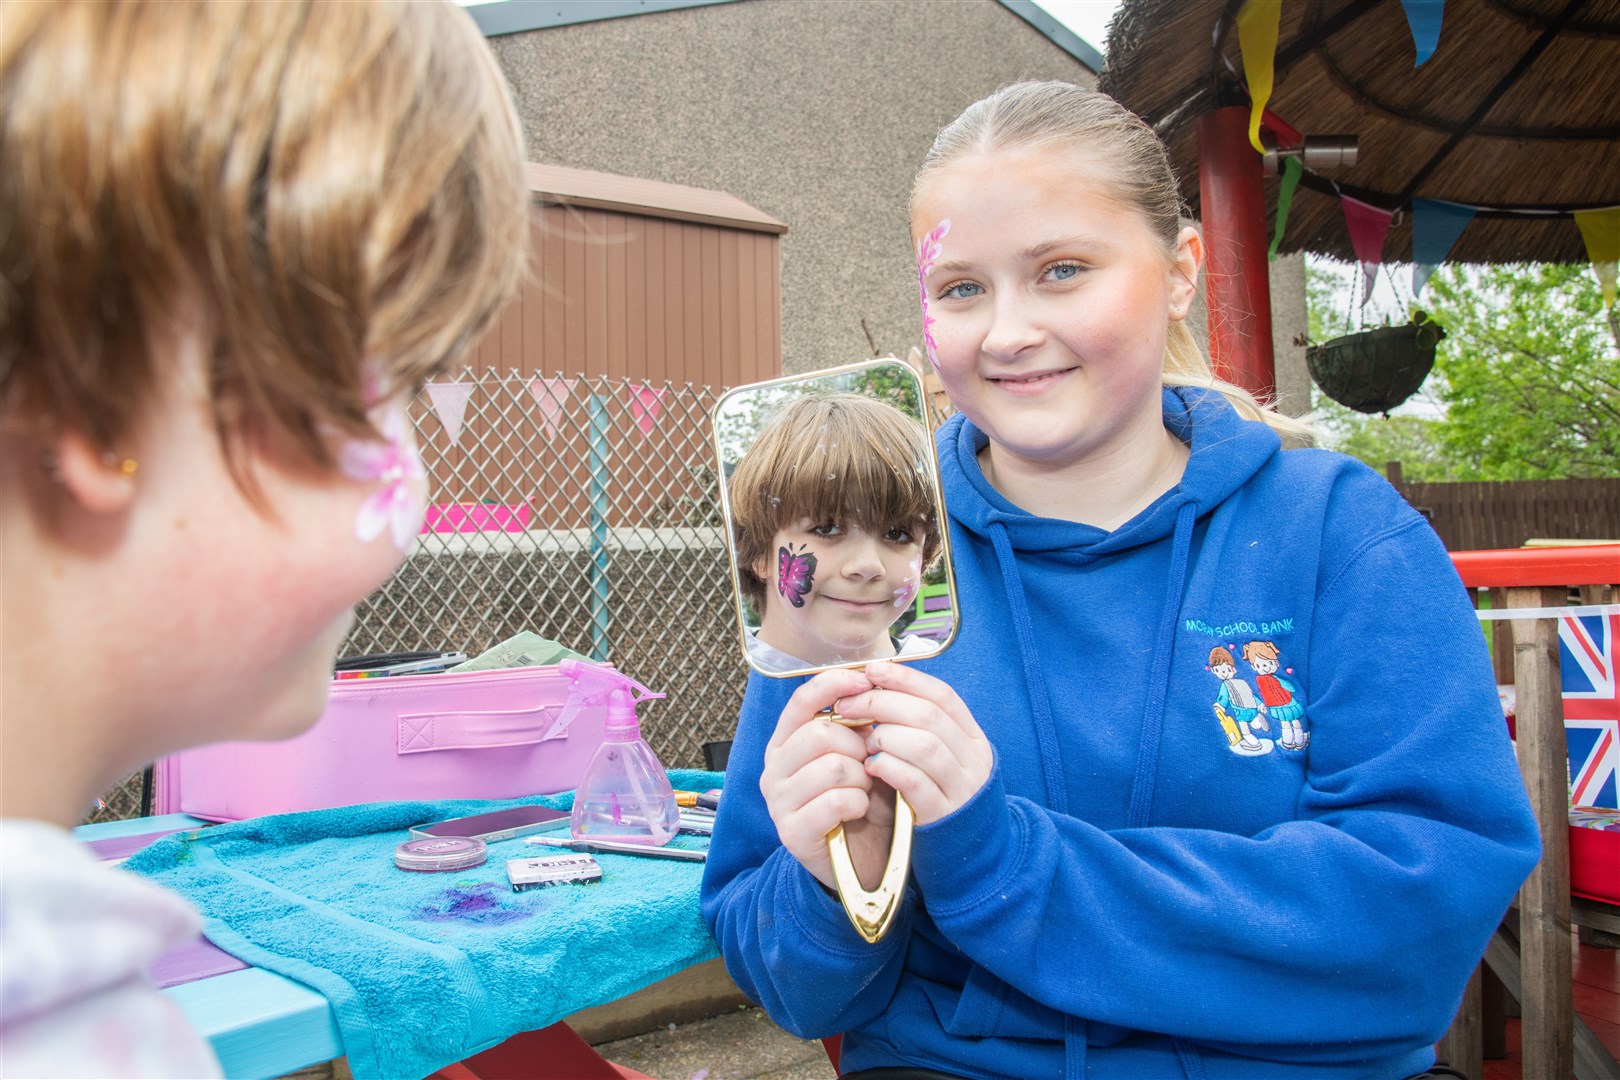 Children also enjoyed getting their face painted. Picture: Daniel Forsyth